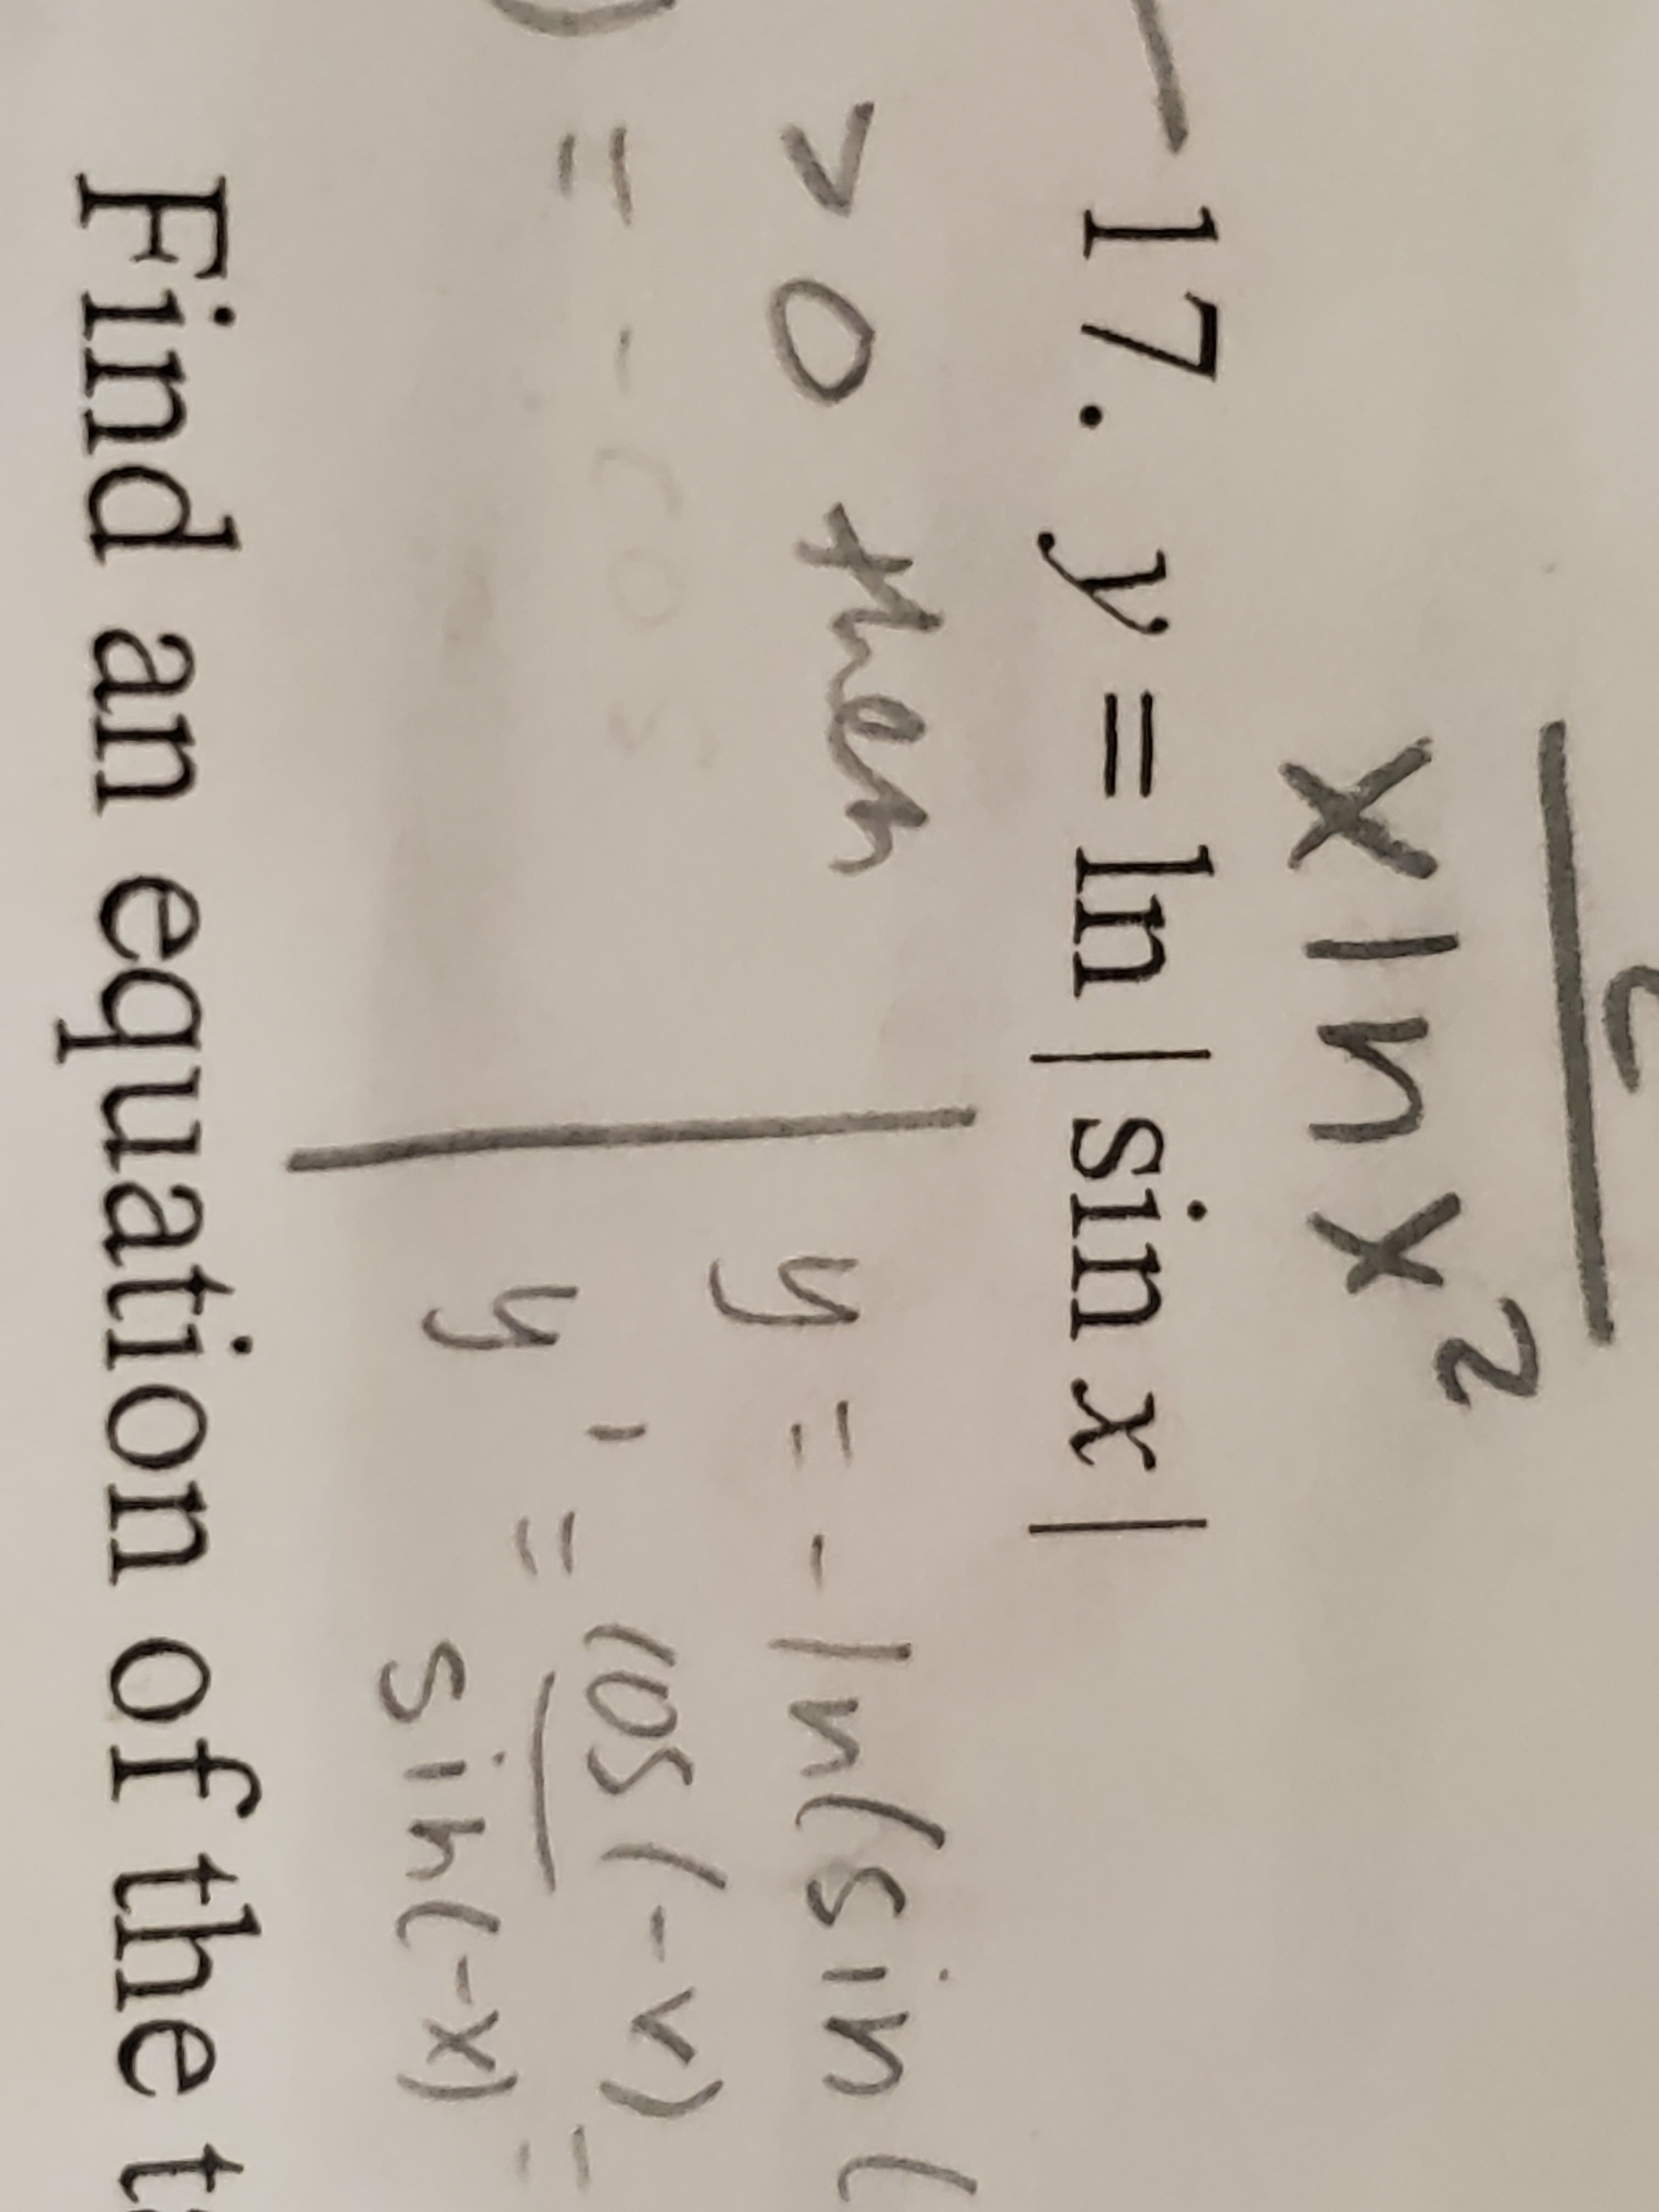 ft
17. y ln sin x |
>0 then
y 1nsin
OS(-v)
(X-24S
Find an equation of the t:
SIh
